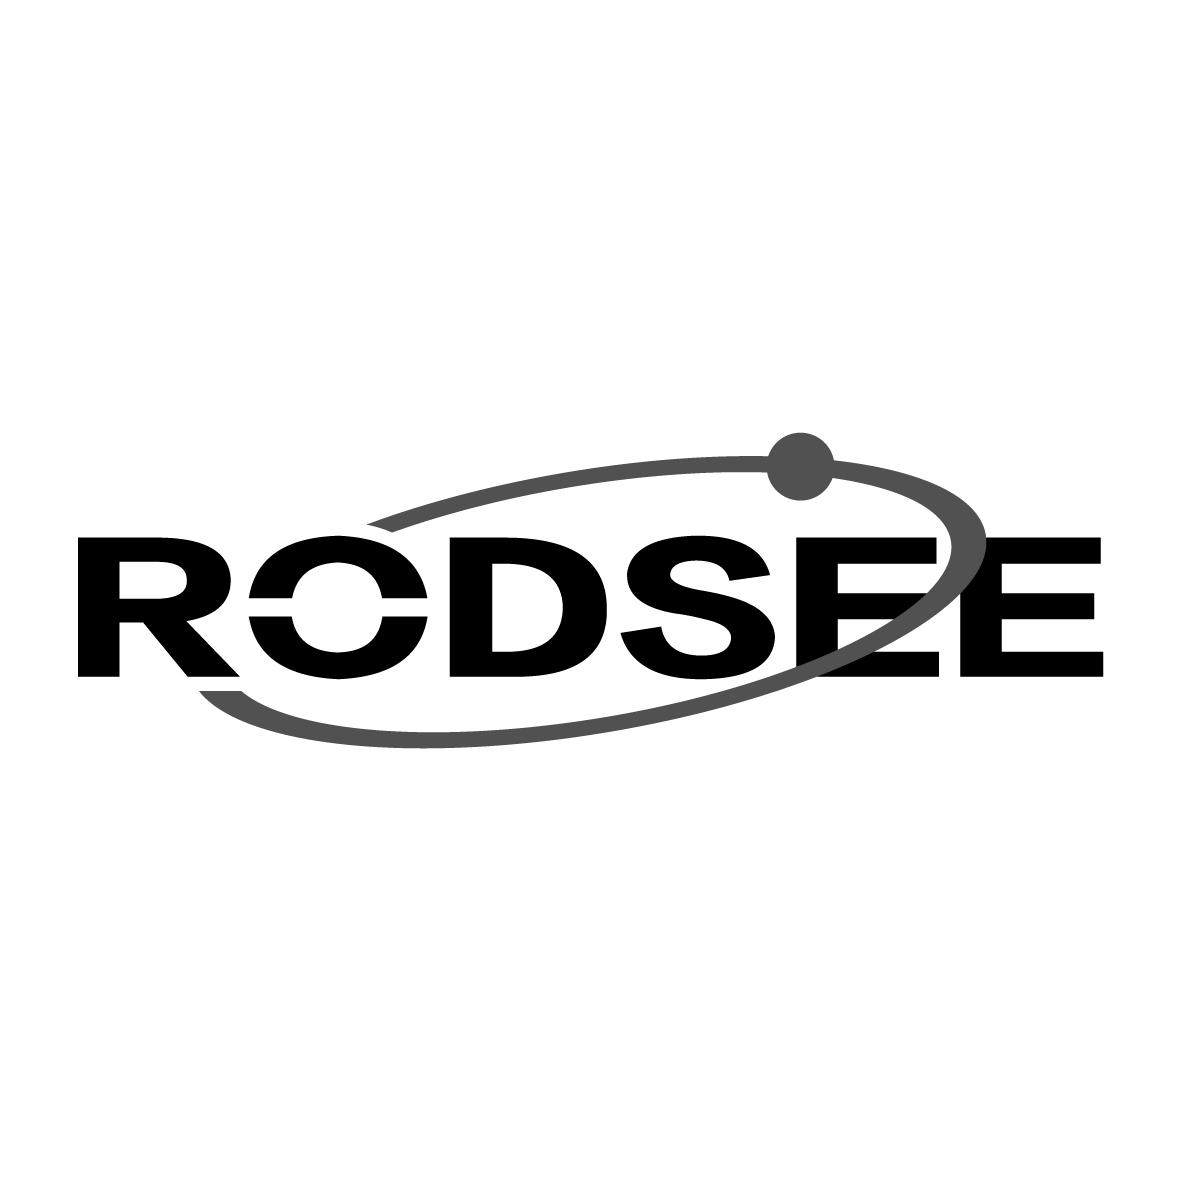 RODSEE